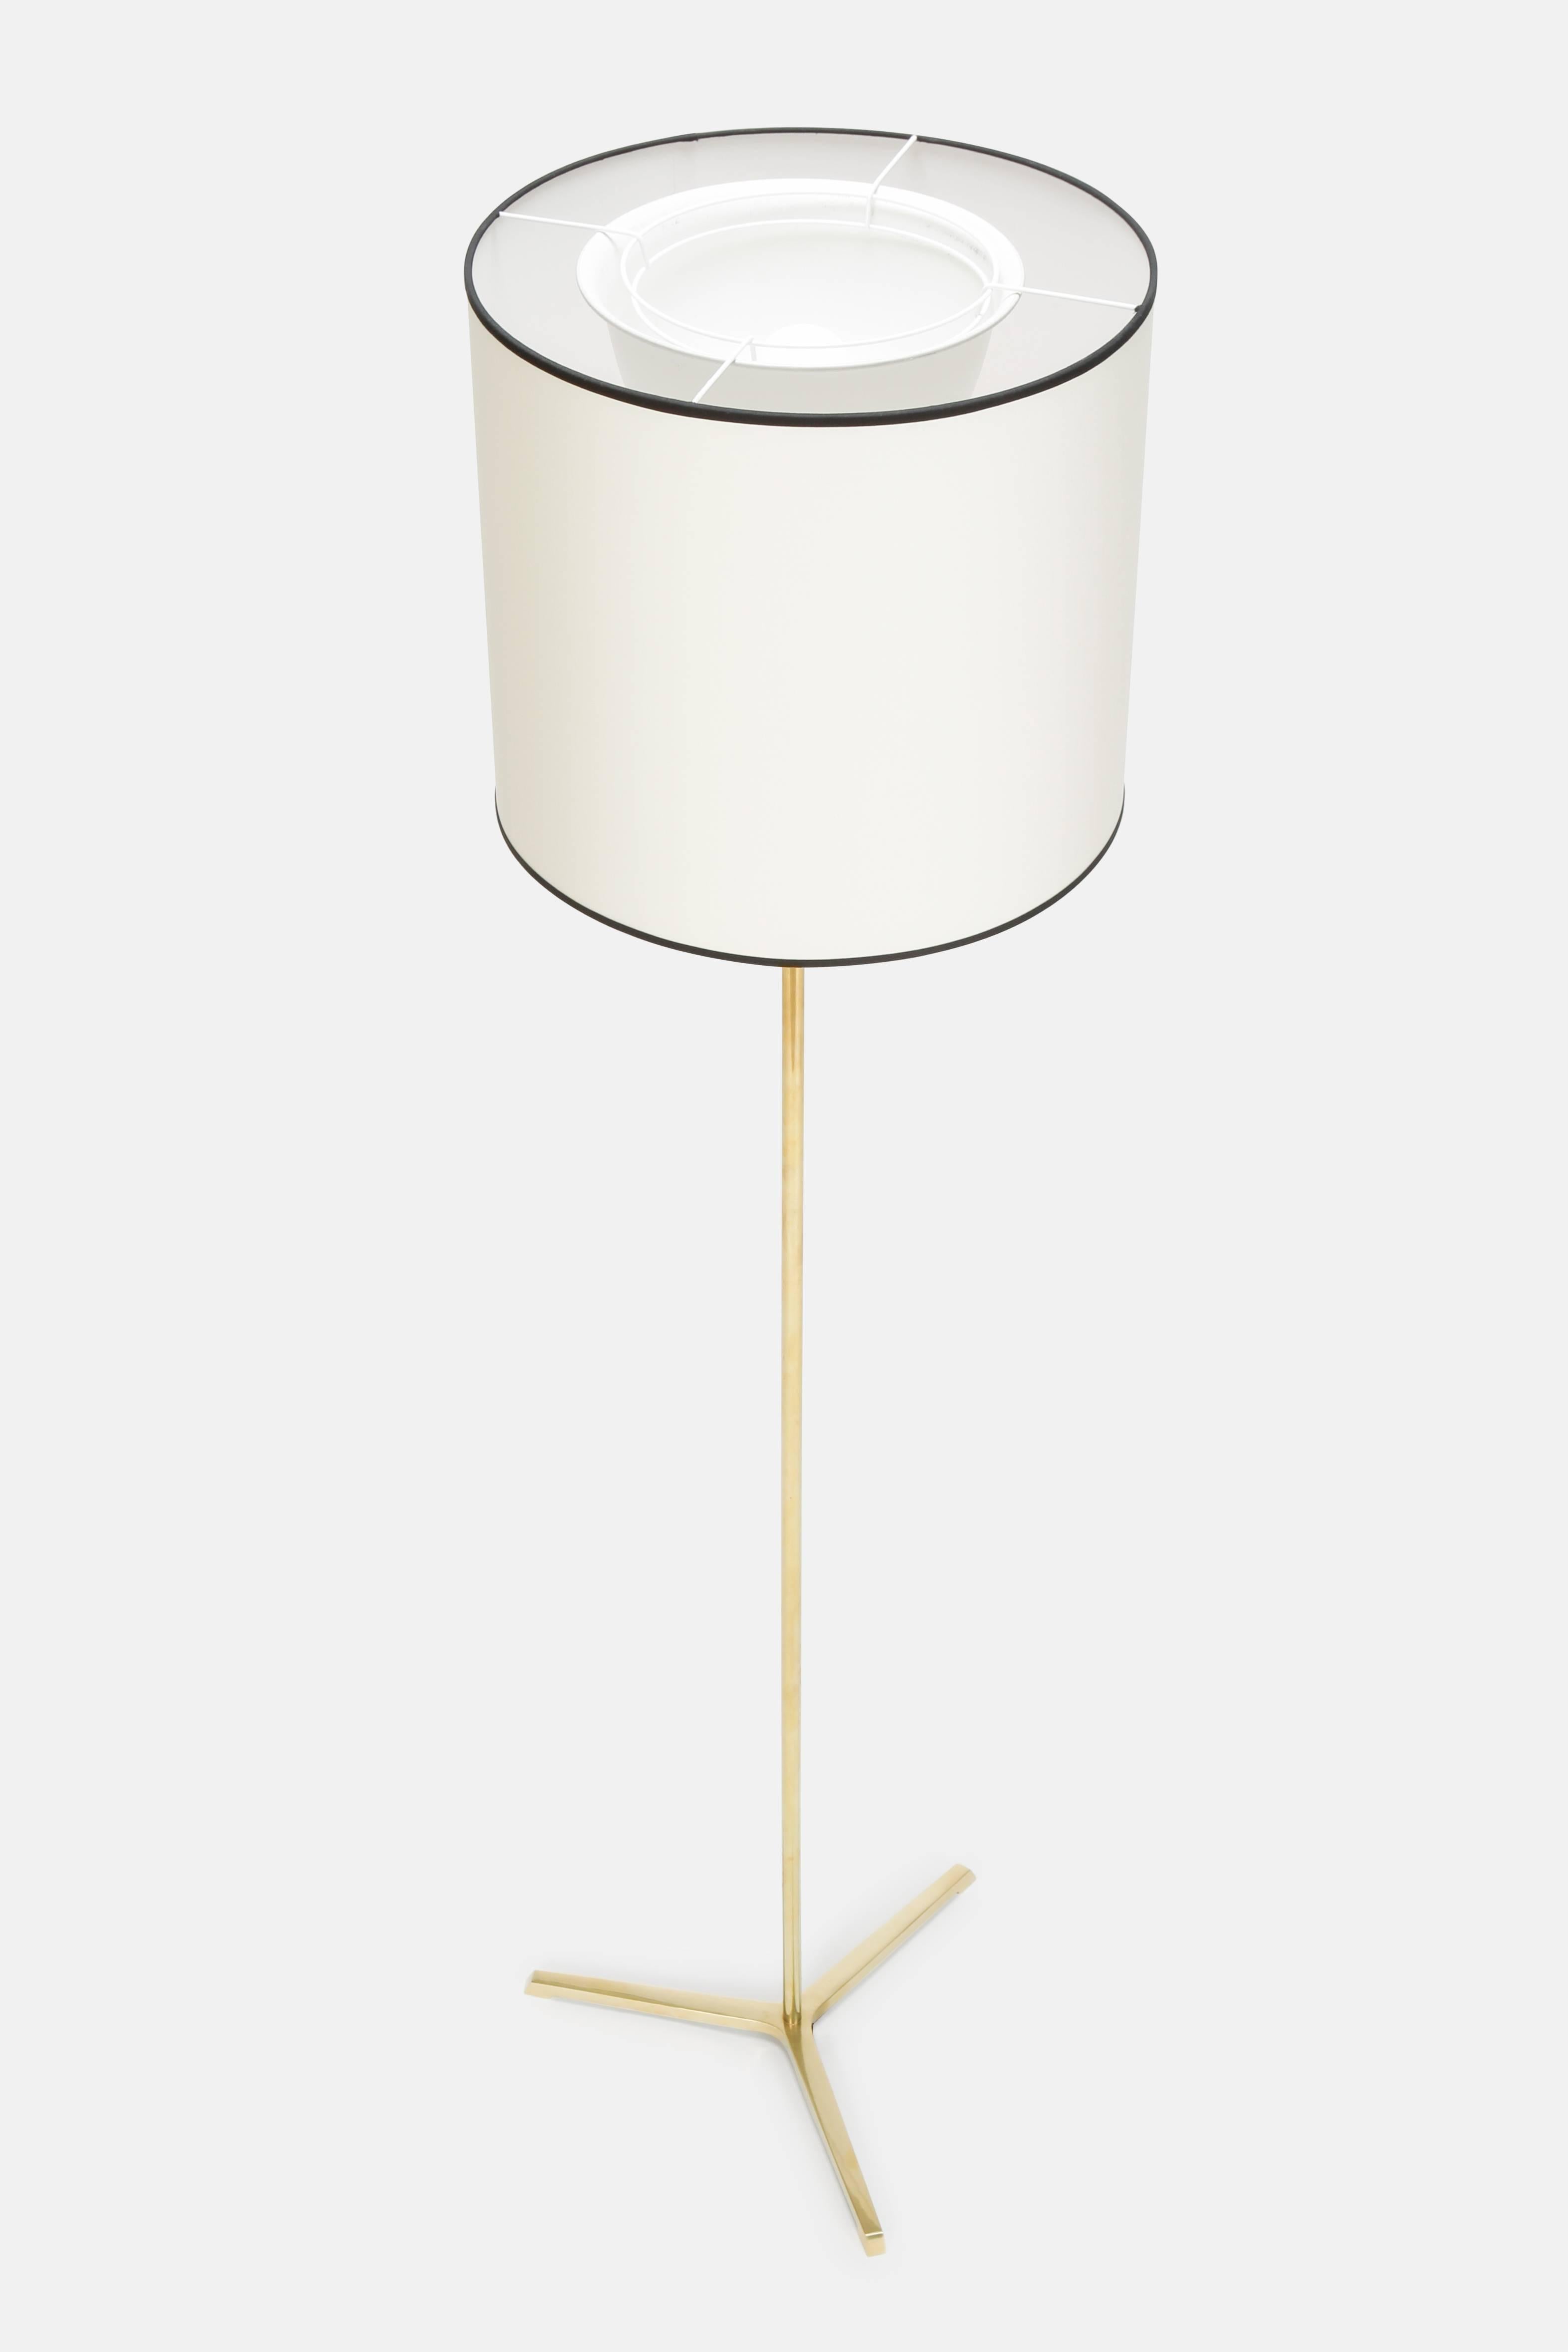 Swiss floor lamp designed and manufactured by Megal AG in the 1960s. Elegant, white cotton shade with black borders on a solid brass column. Completely new wired, very god condition. Beautiful proportions.